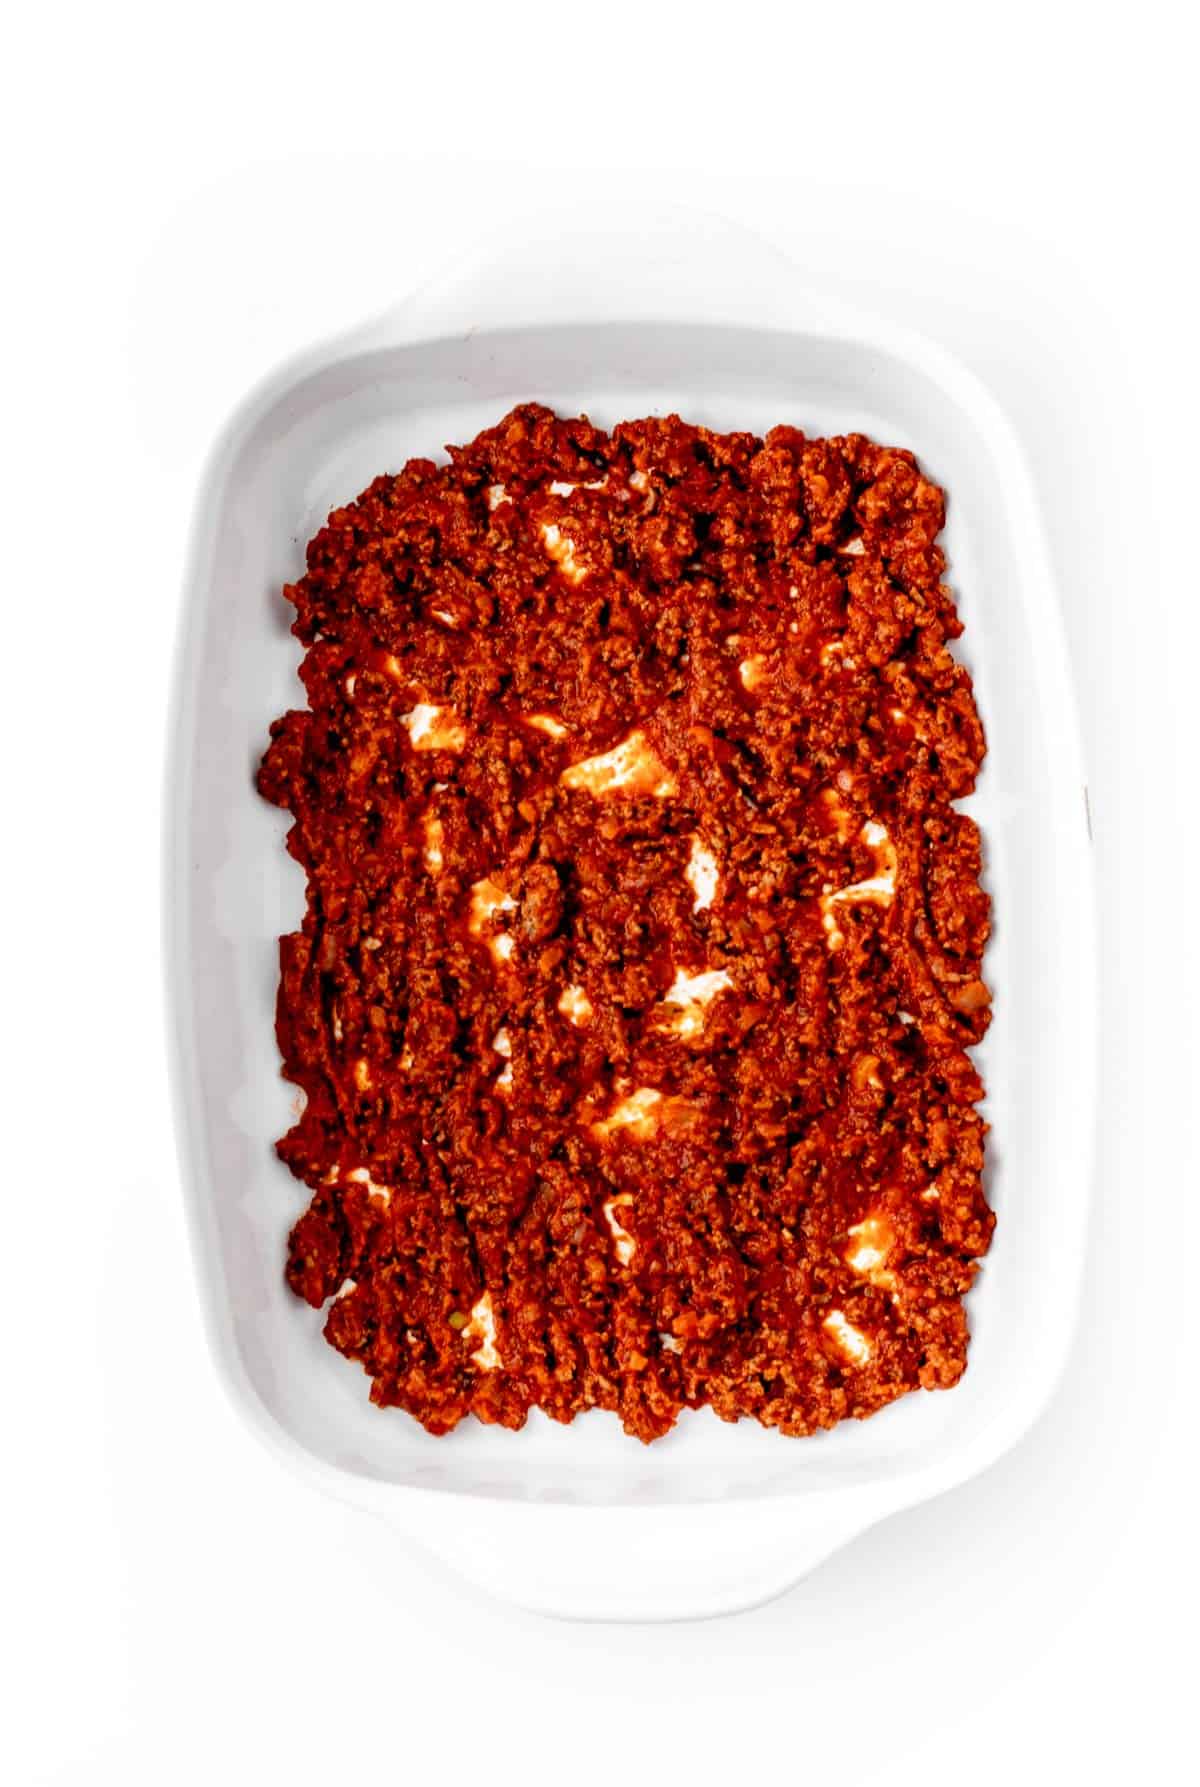 A baking dish with a layer of hidden veggie pasta sauce on the bottom.